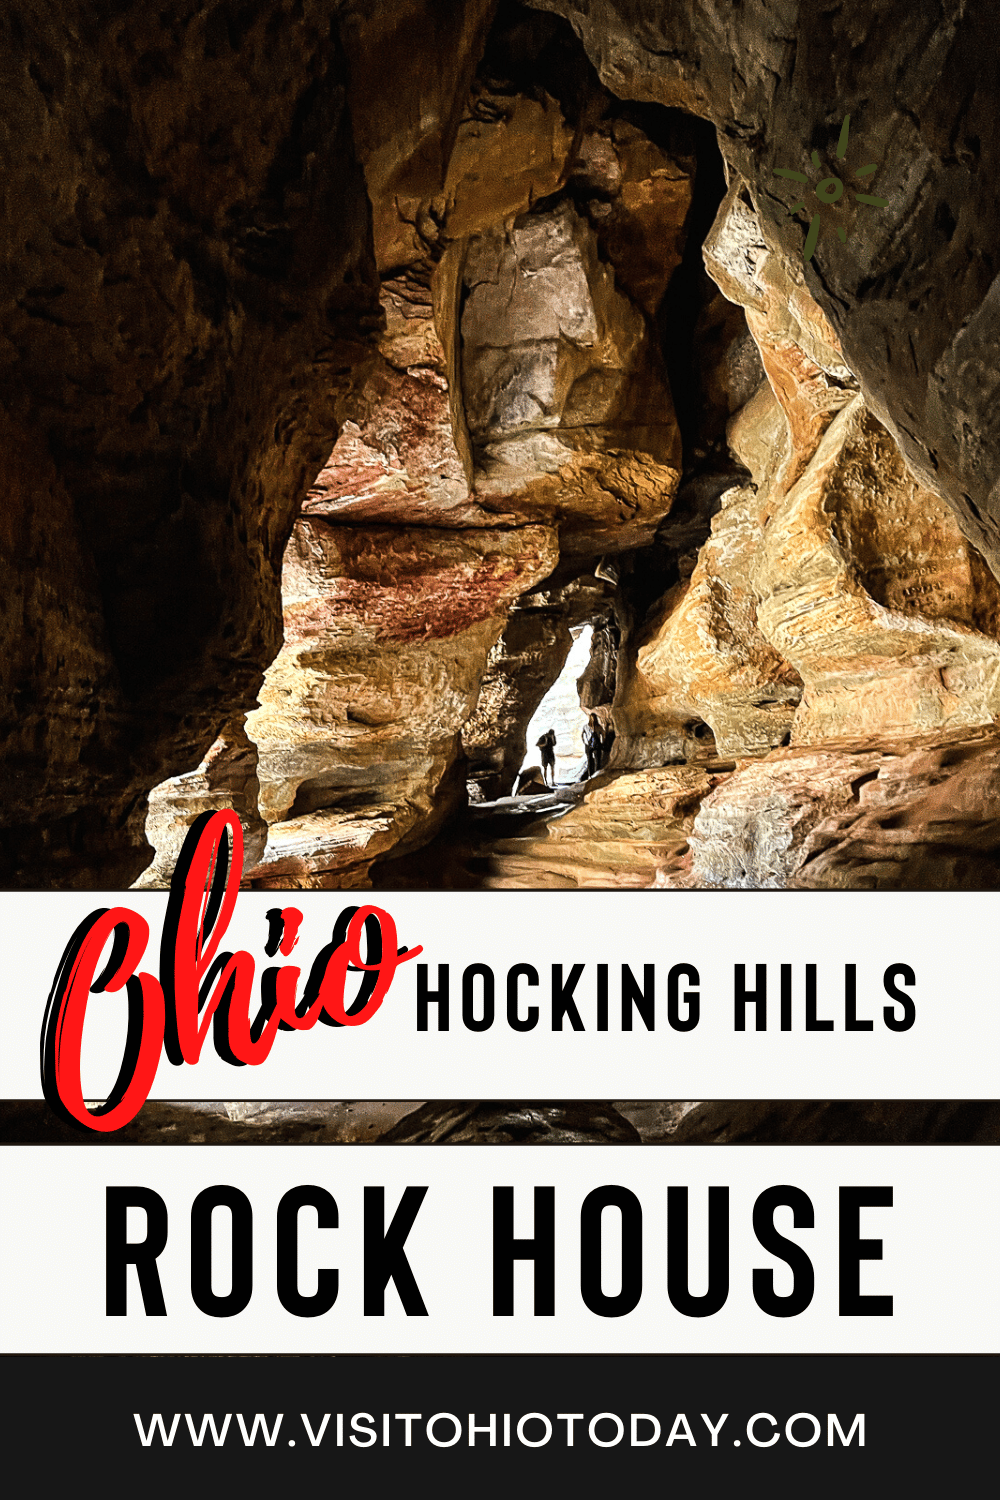 Rock House is an interesting part of the Hocking Hills Region. If you are into Caving and Hiking then this is the place for you. Read on to find out more. | Rock House Hocking Hills | Rock House Trail | Hocking Hills Ohio | Hocking County | Logan Ohio